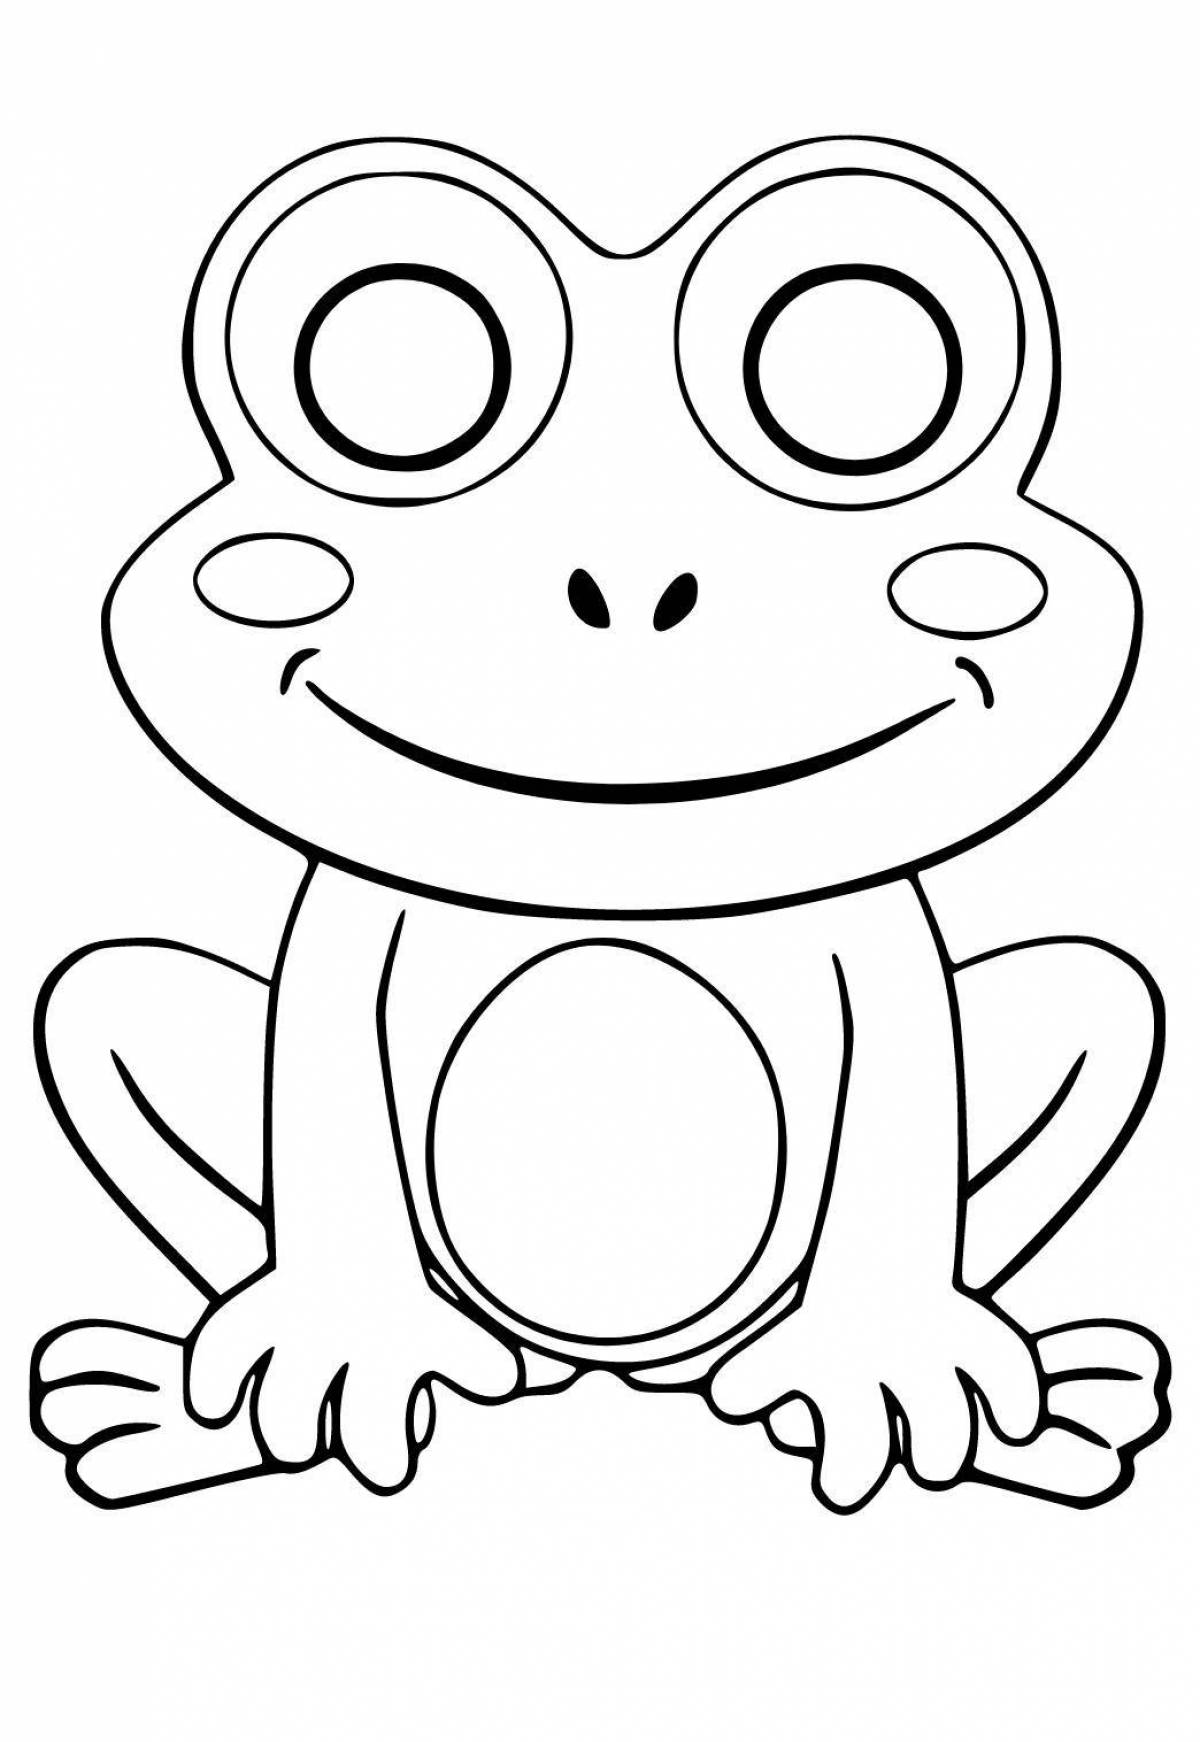 Joyful frog coloring book for 3-4 year olds